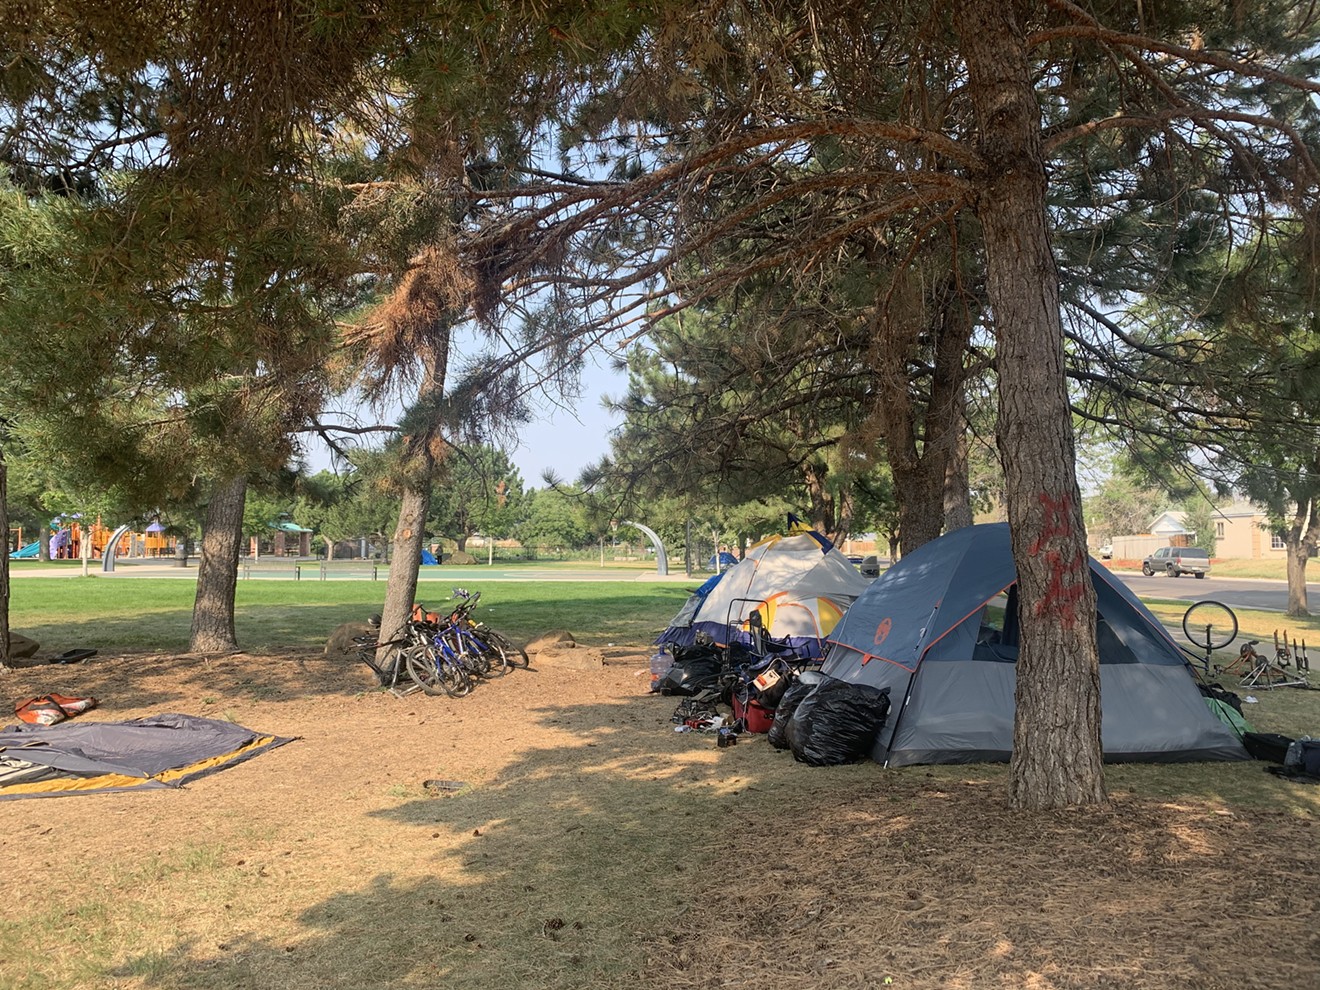 Even though Aurora has encampments, the city has not enacted a camping ban.